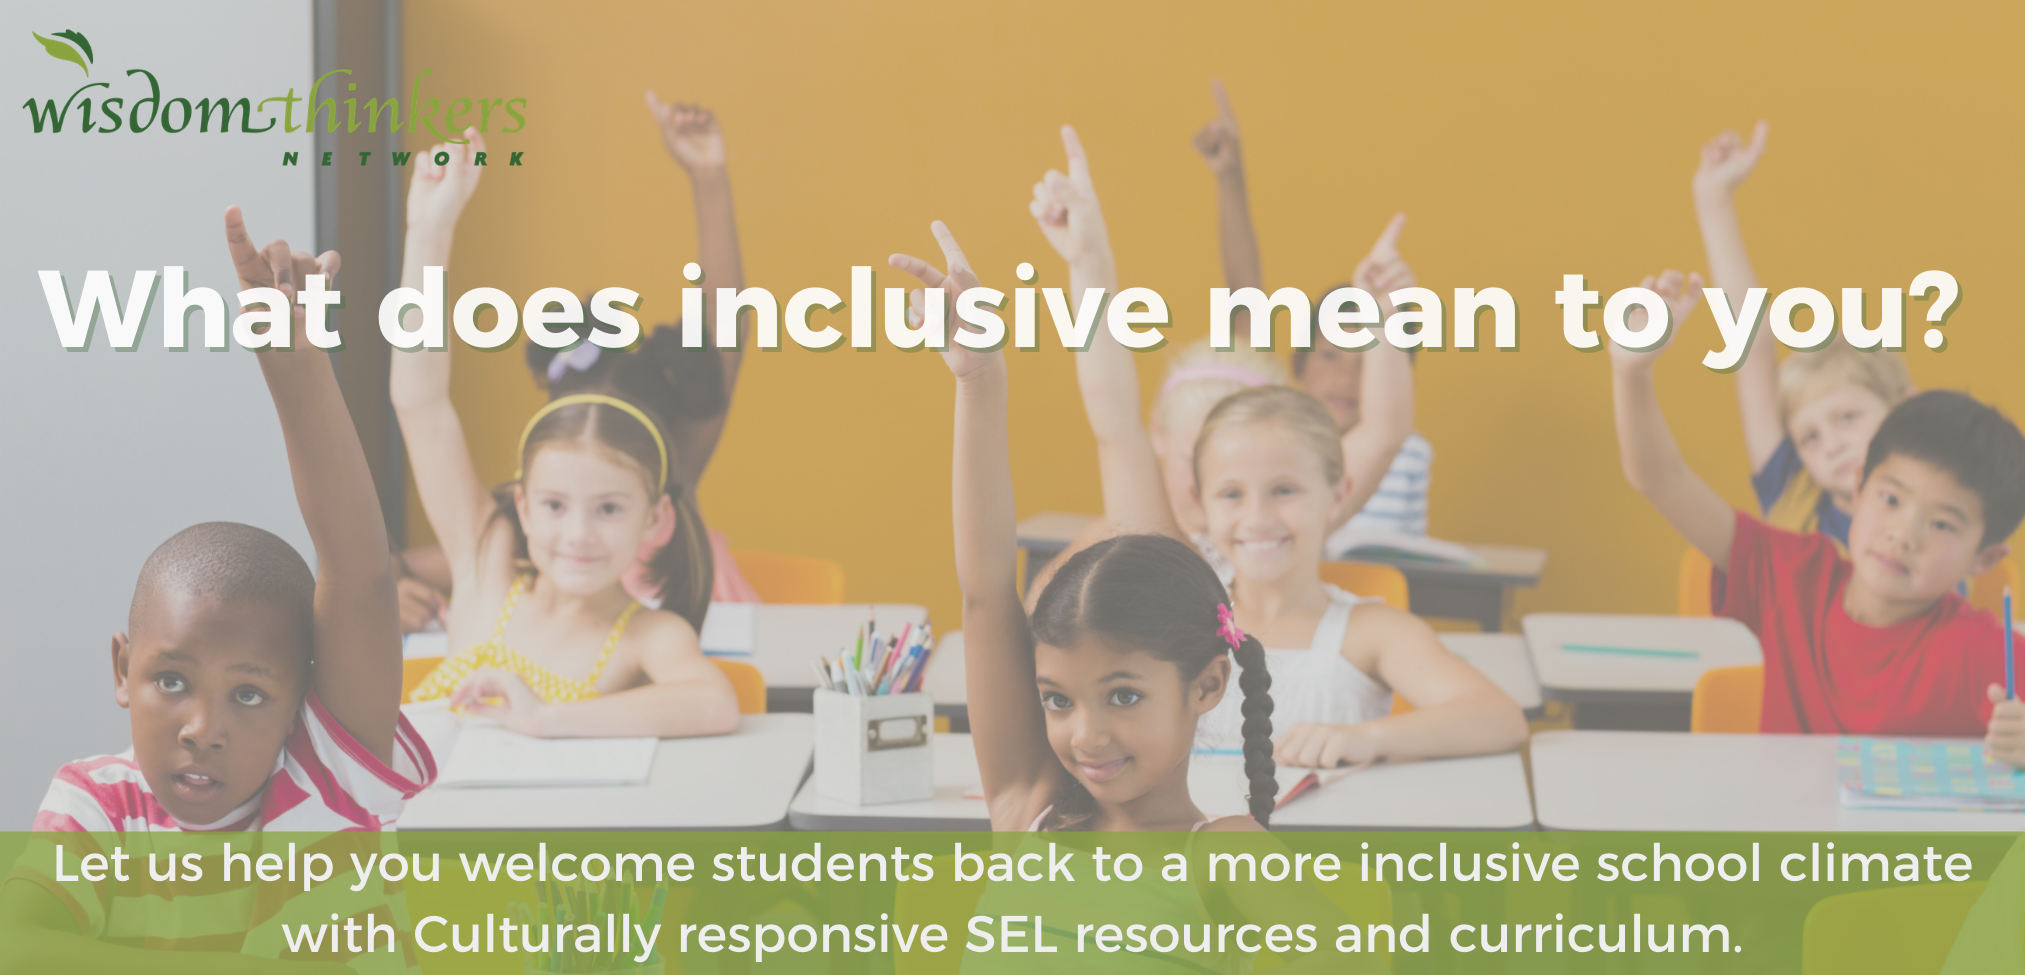 What does inclusive mean to you? Let us help you welcome students back to a more inclusive school climate with Culturally responsive SEL resources and curriculum.